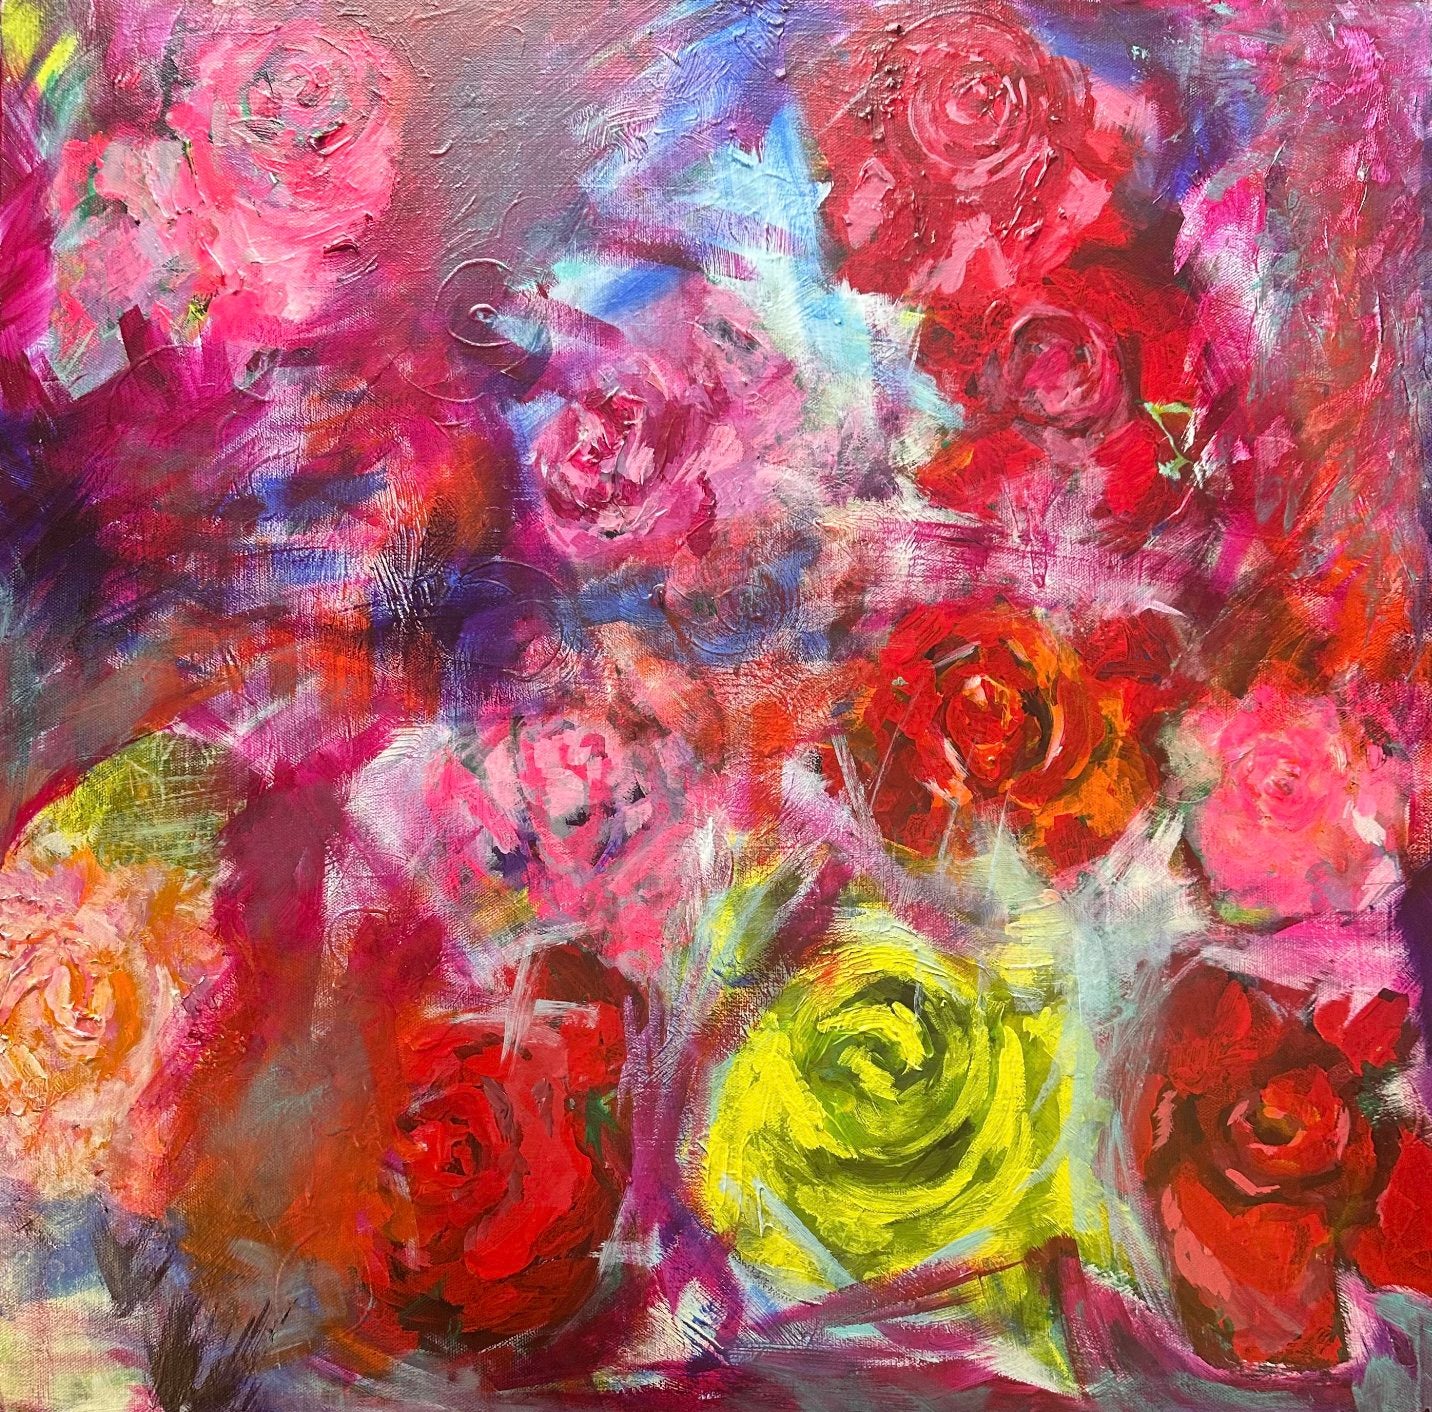 Painting of red, pink, orange and yellow roses